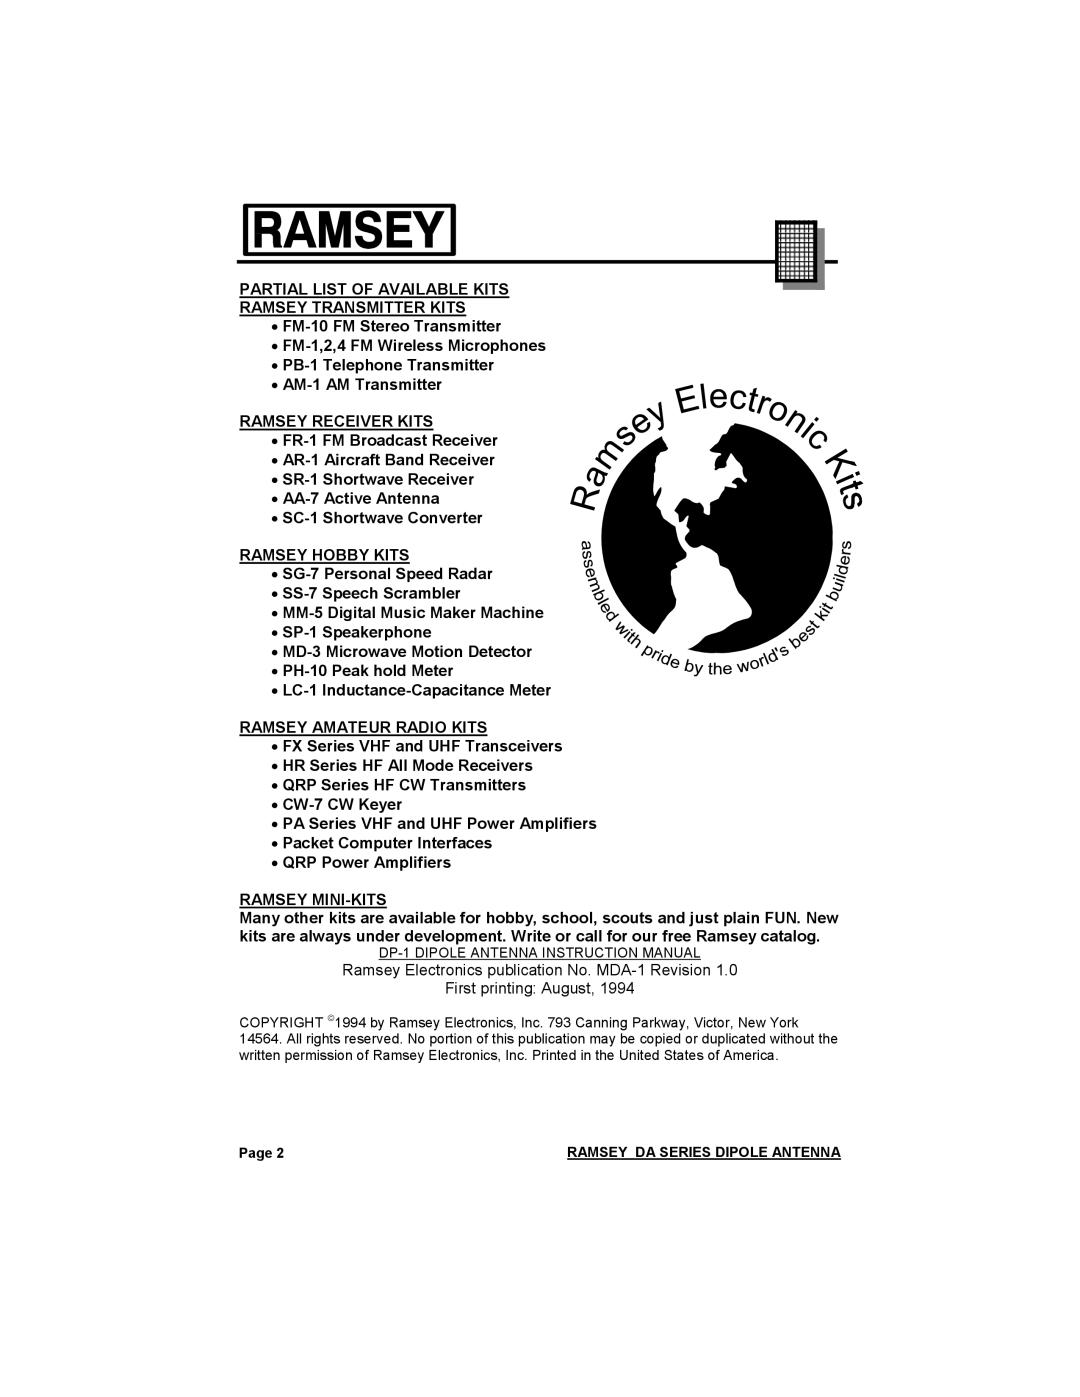 Ramsey Electronics DA-160 manual Partial List Of Available Kits 